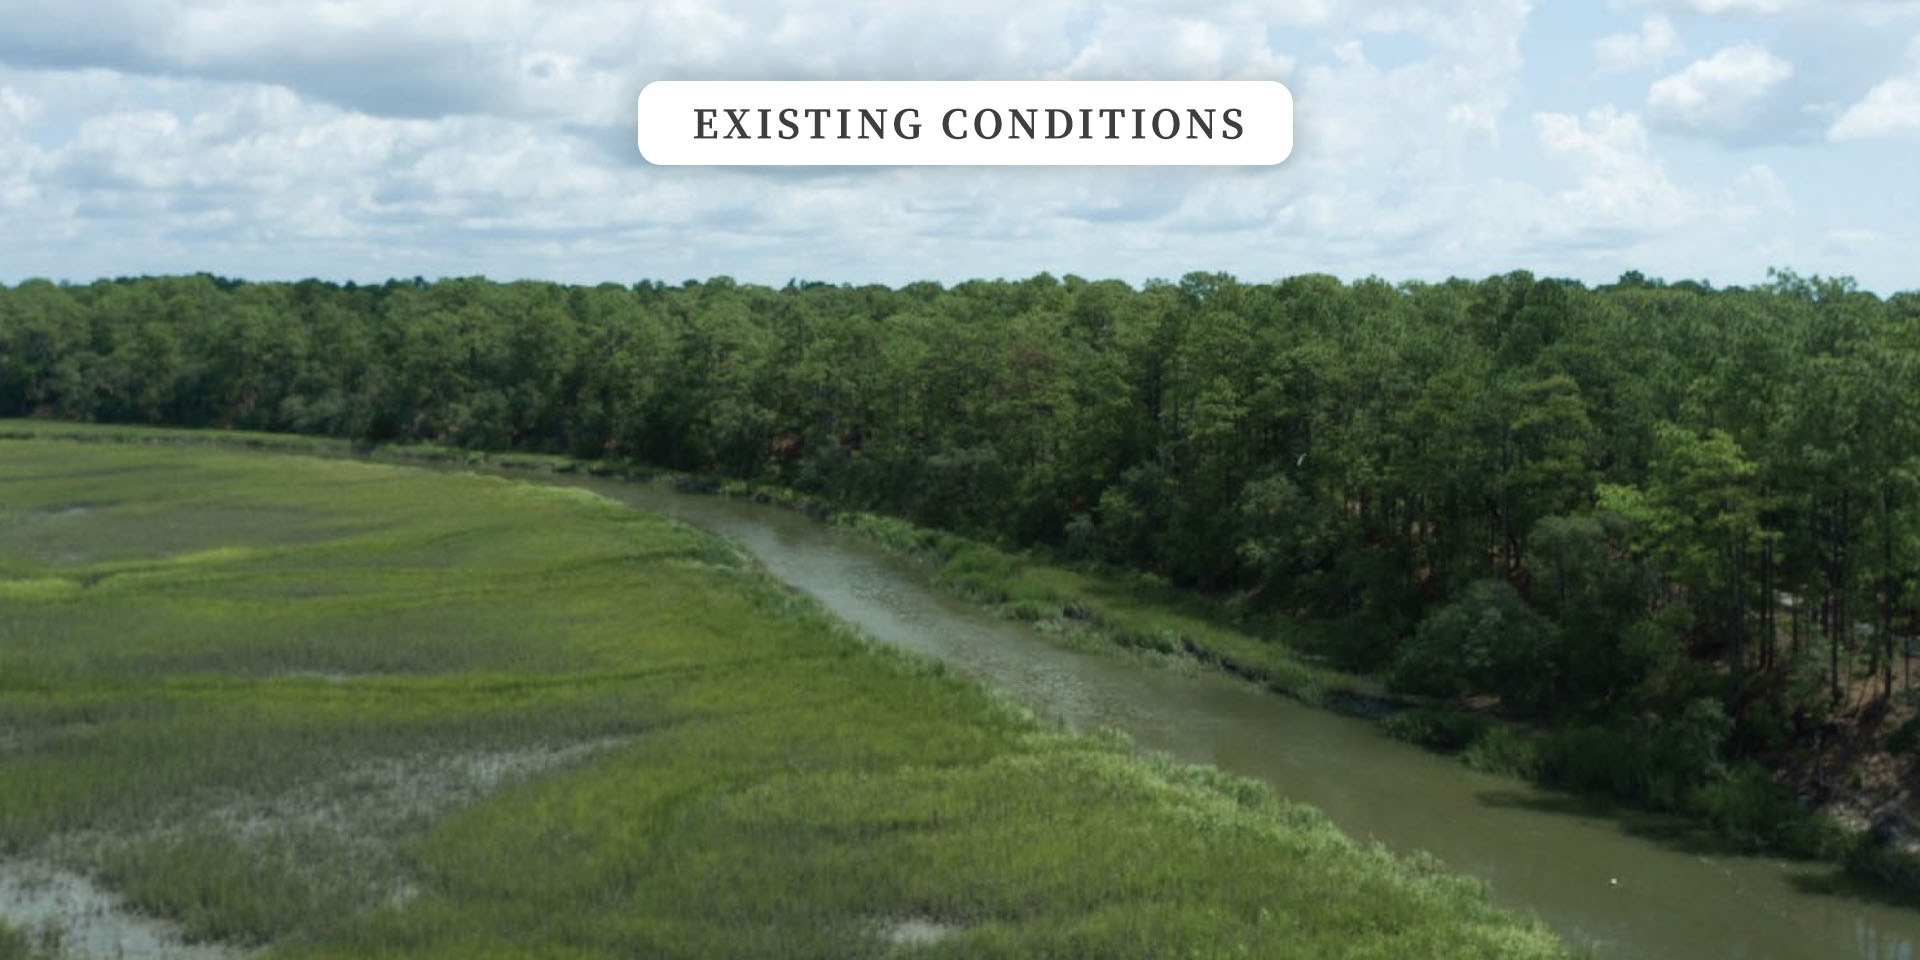 Looking to Eddings Creek: Existing Conditions